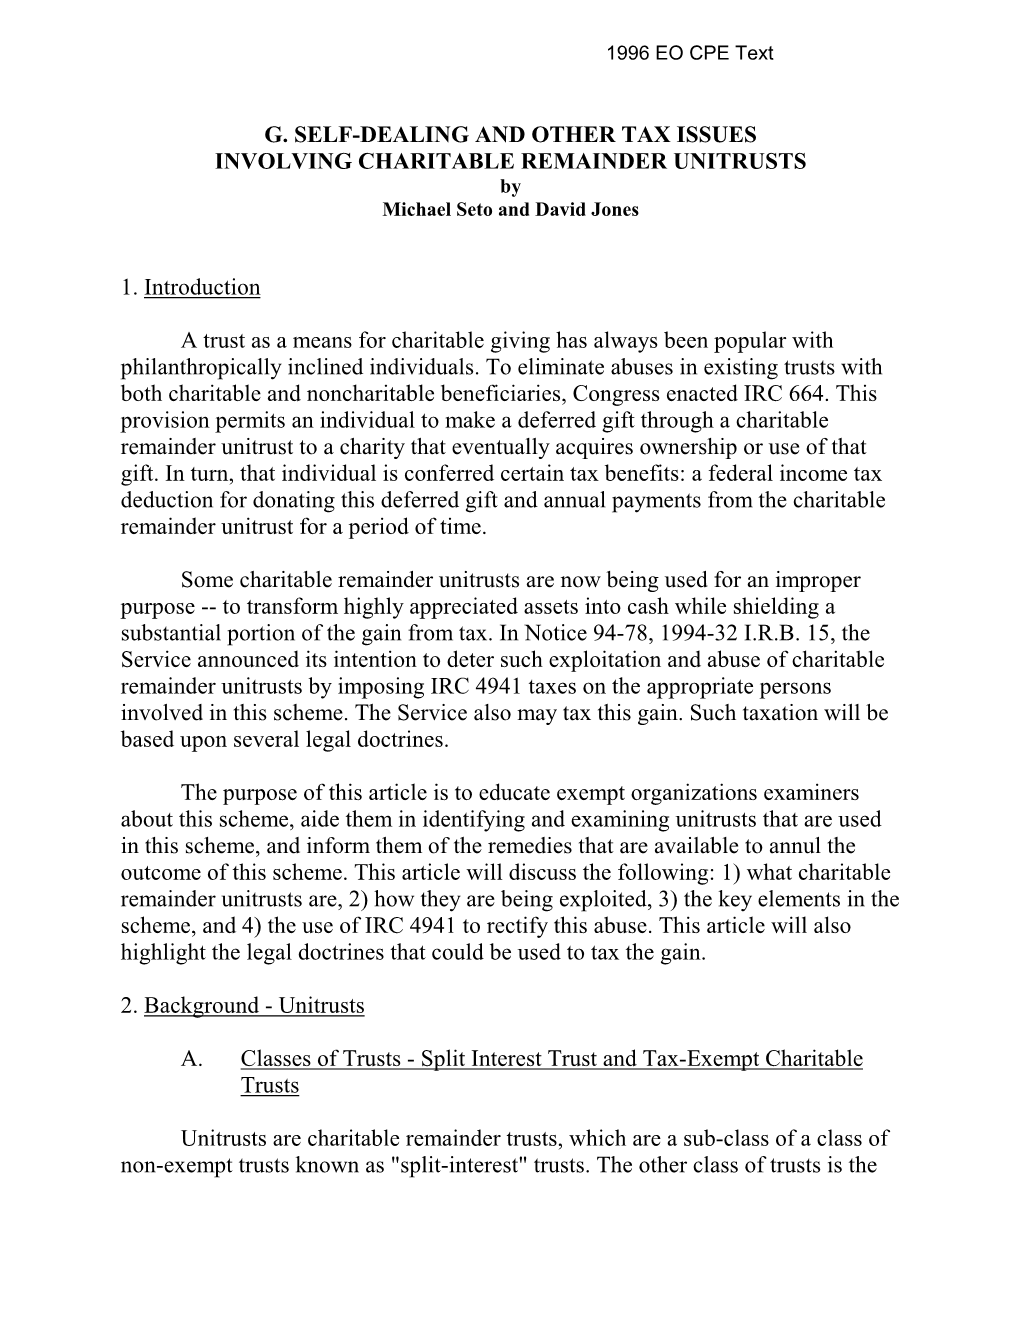 G. SELF-DEALING and OTHER TAX ISSUES INVOLVING CHARITABLE REMAINDER UNITRUSTS by Michael Seto and David Jones